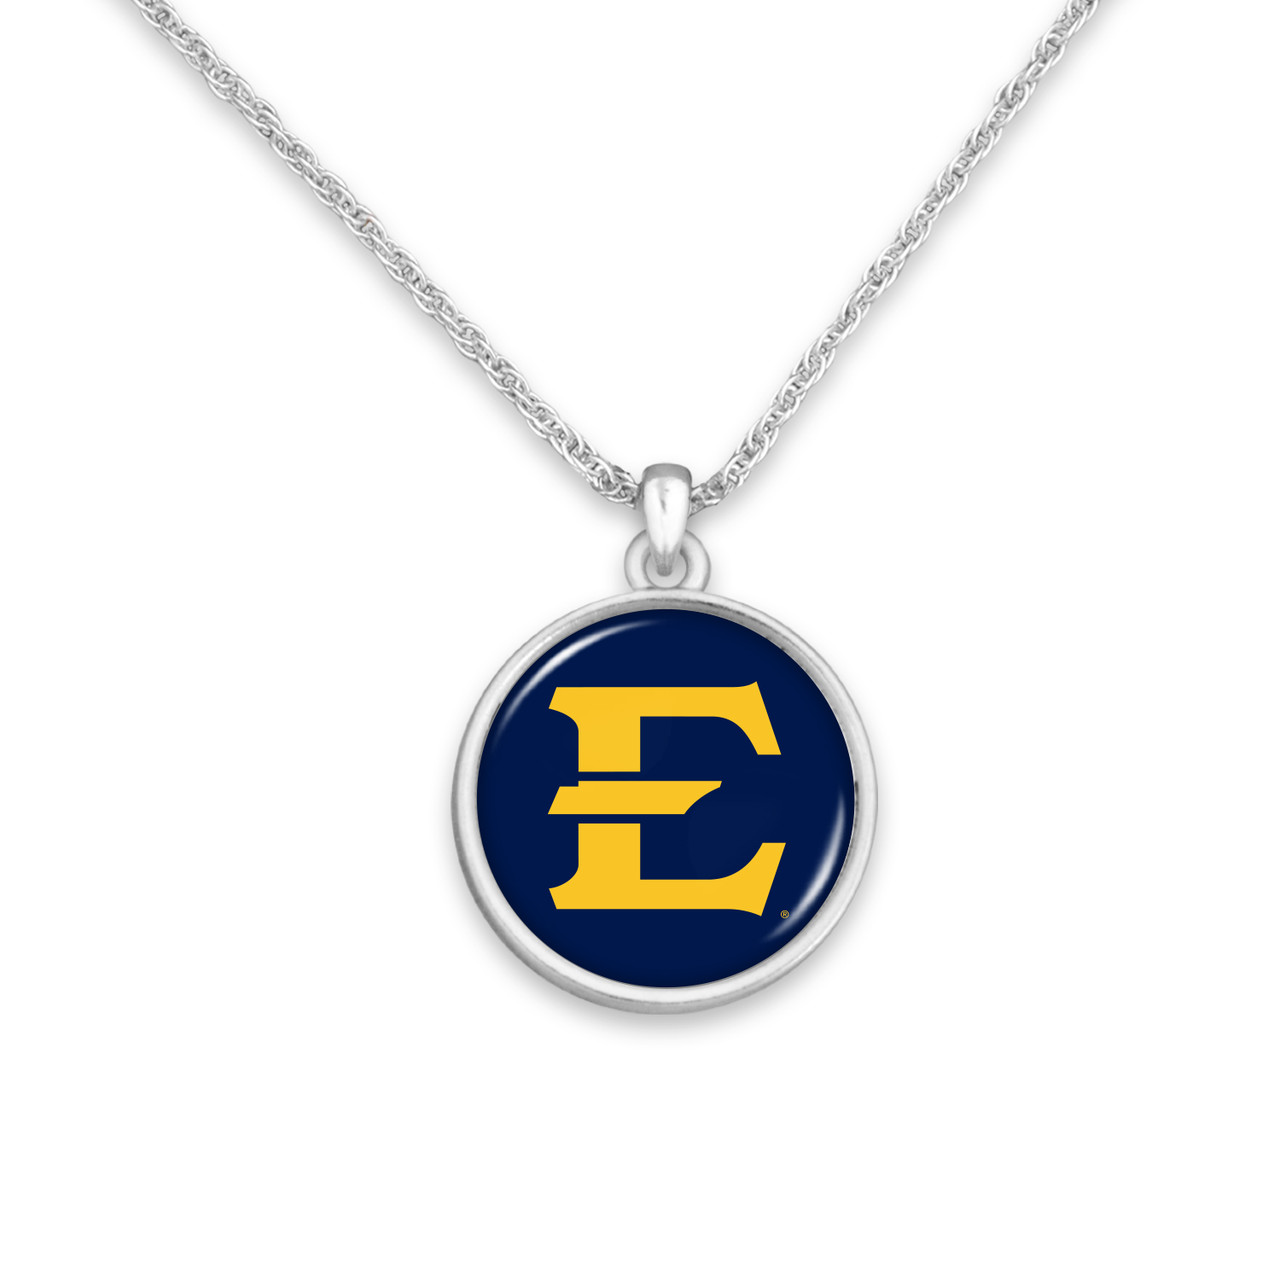 East Tennessee State Buccaneers Necklace- Campus Chic